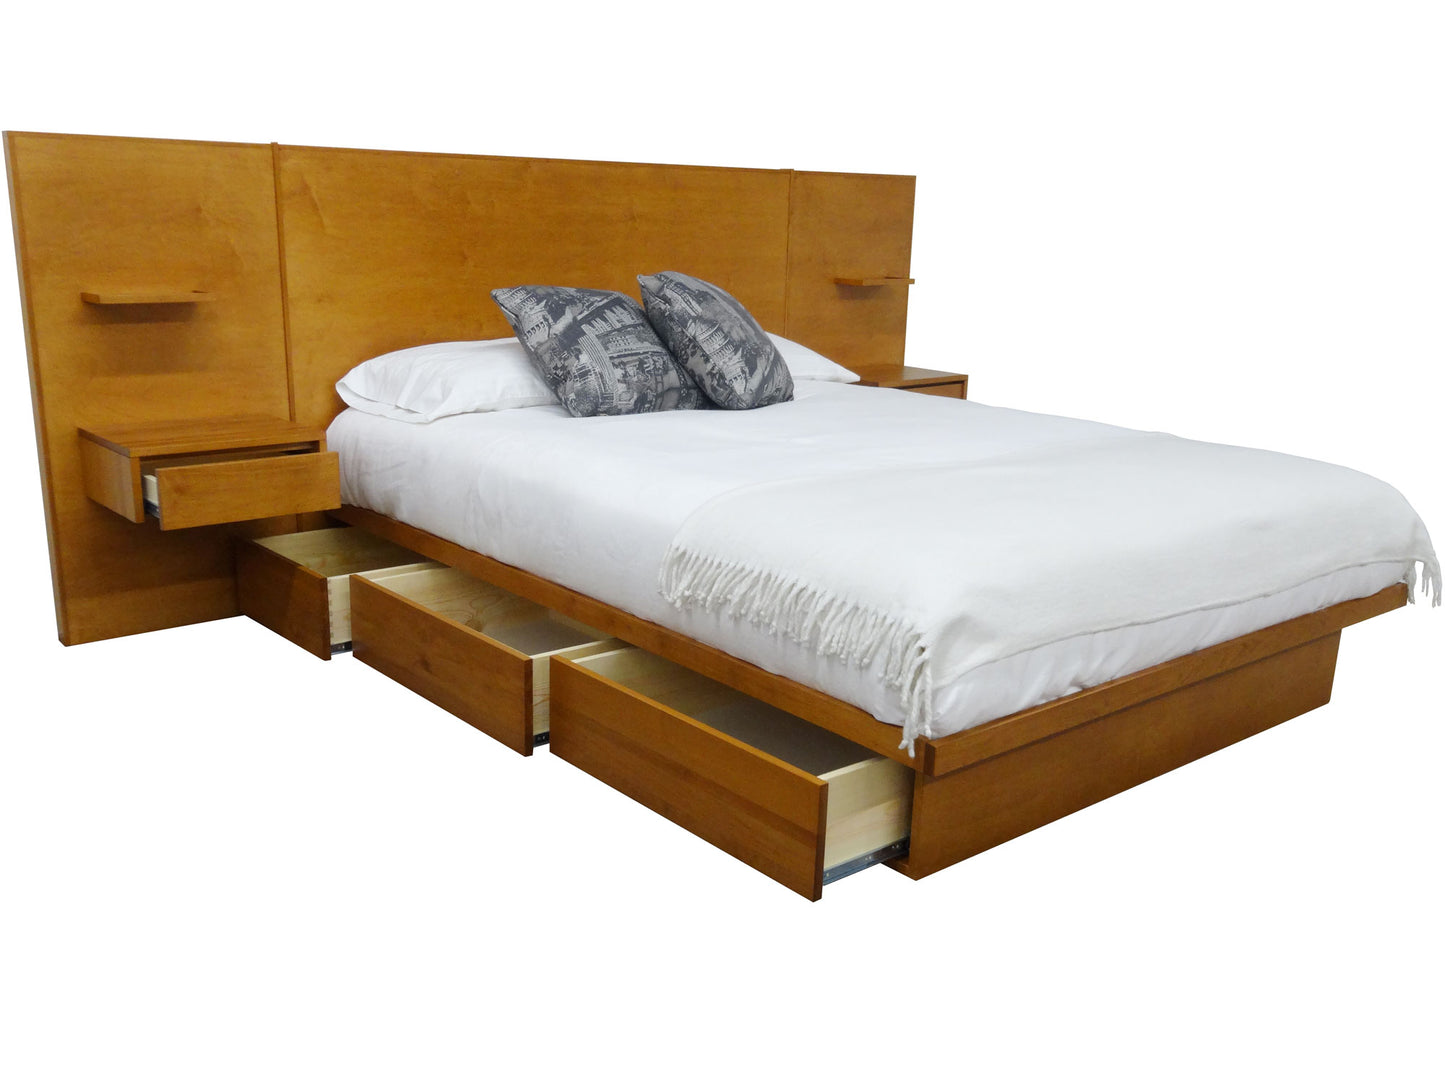 Muse LA Storage Bed - open drawers